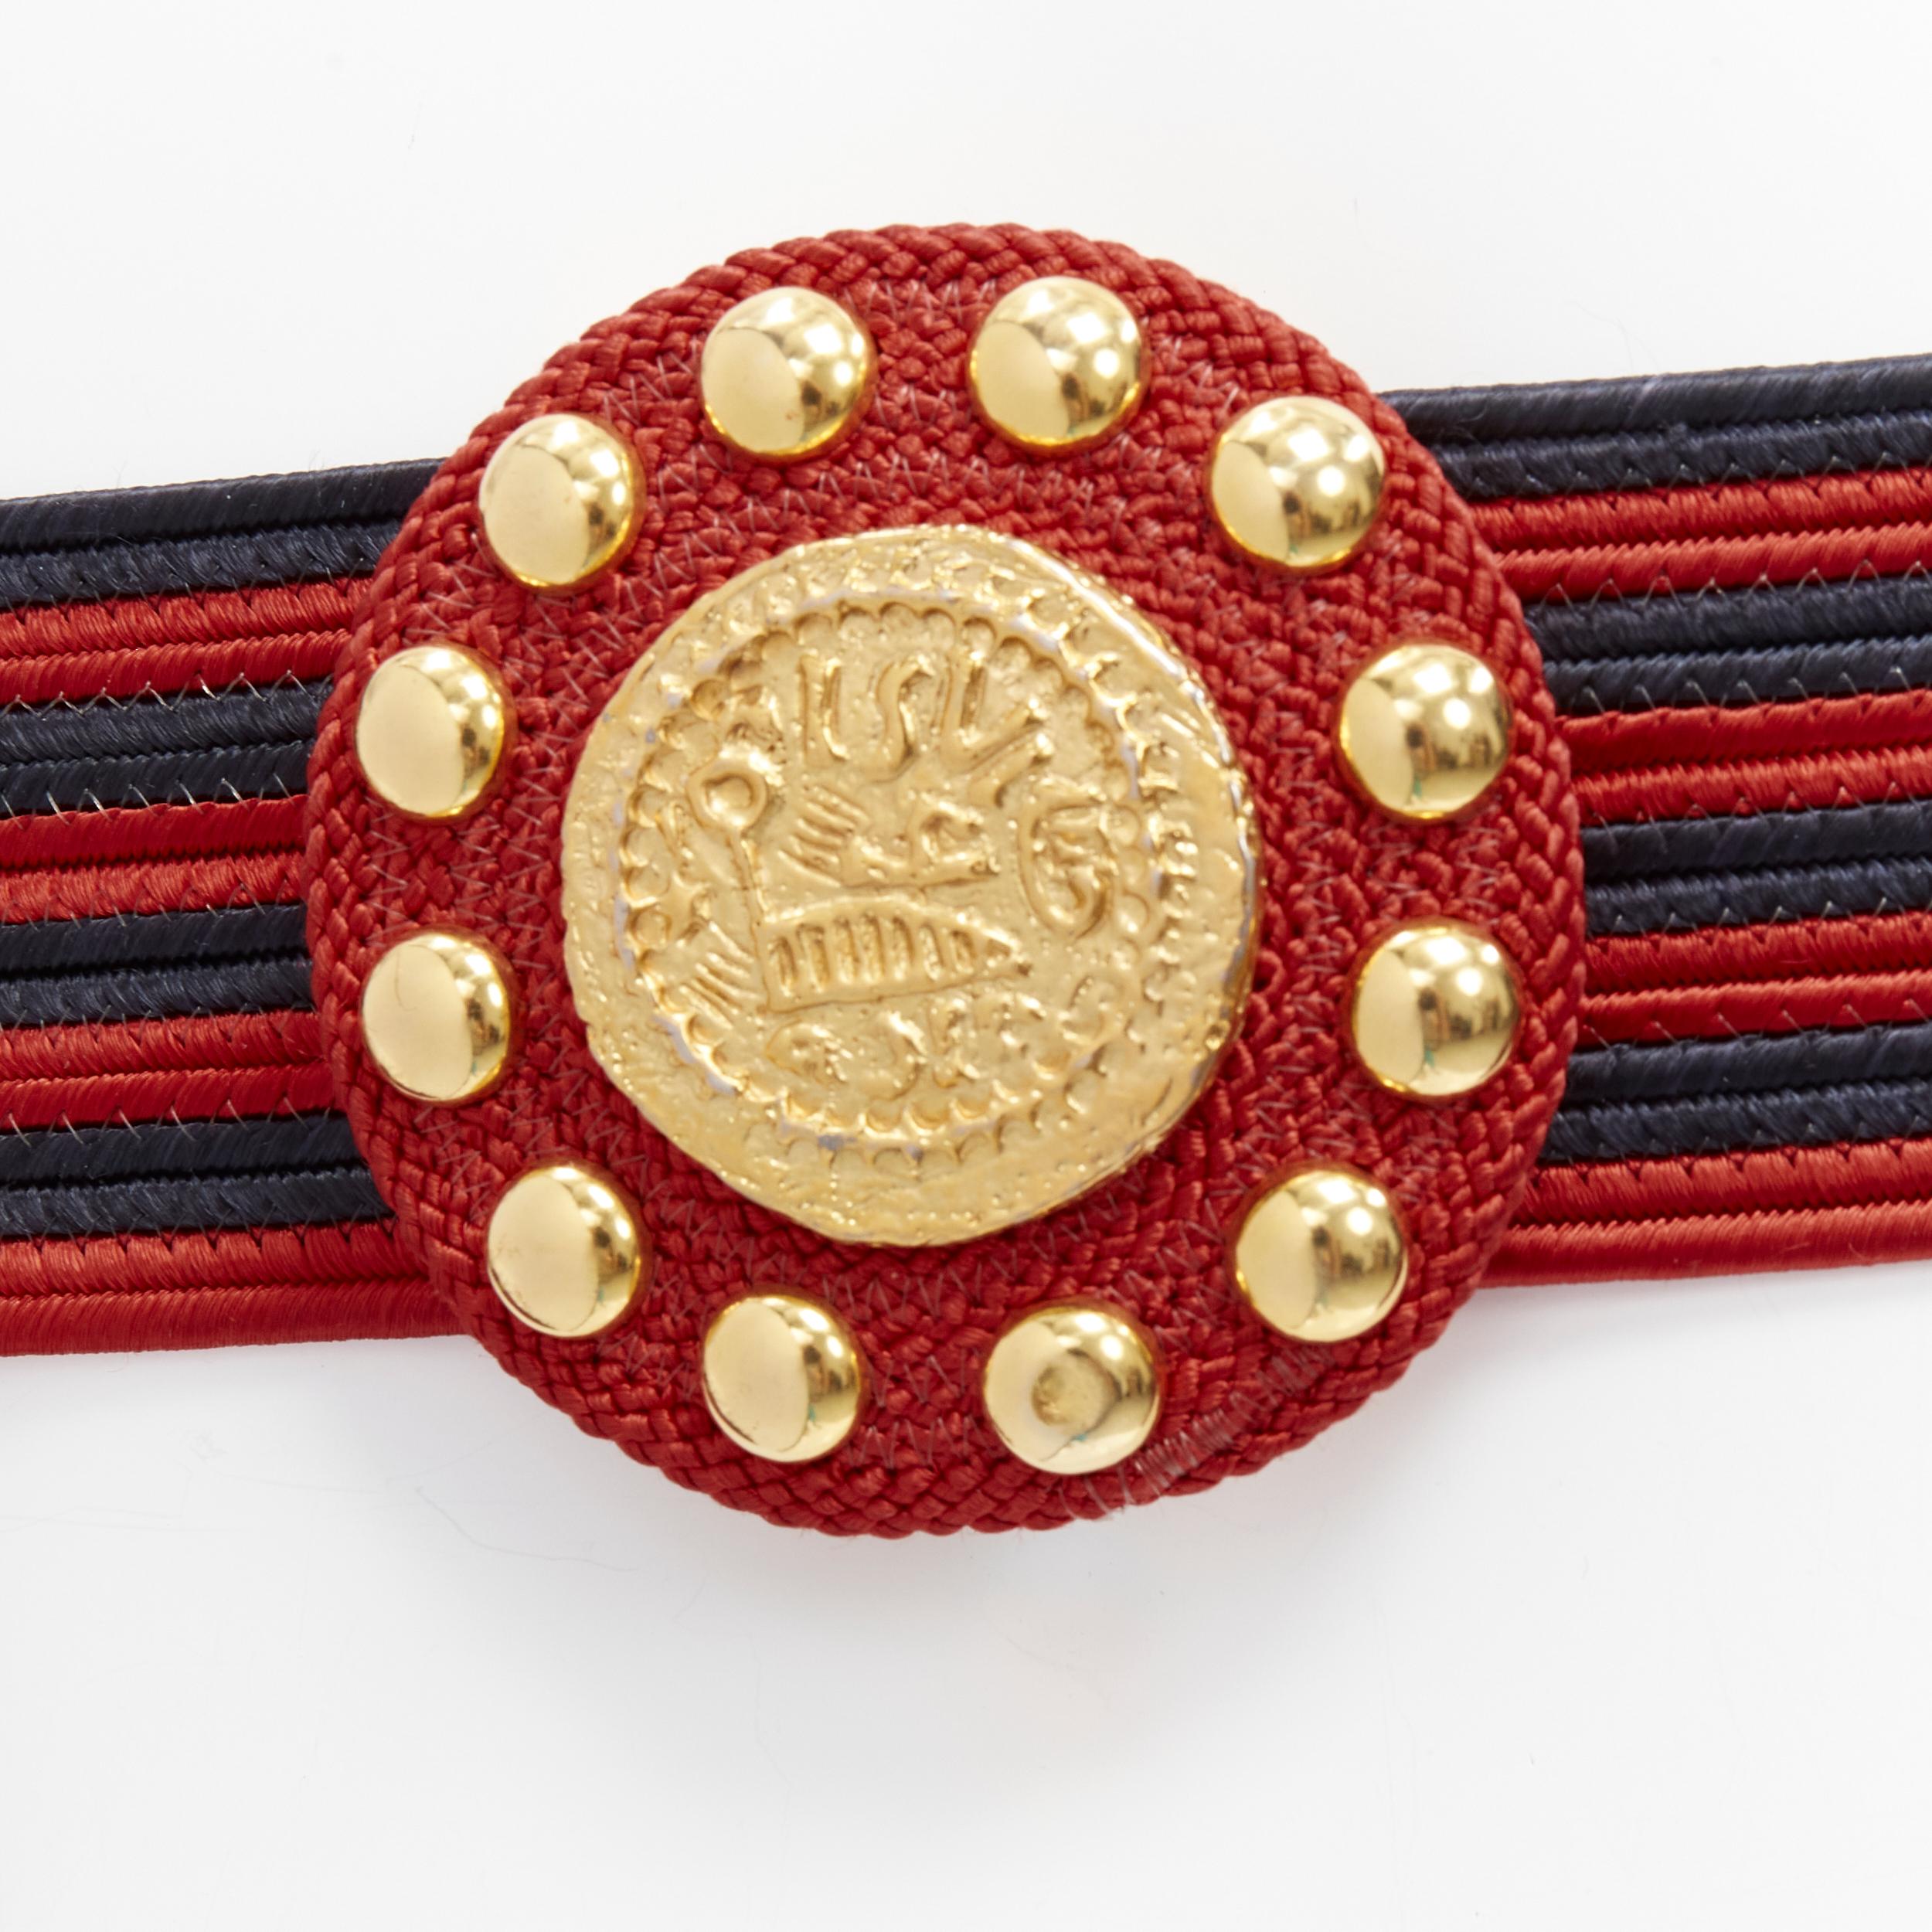 YVES SAINT LAURENT Rive Gauche 1980's red black tassel YSL logo coin boho waist belt
Reference: TGAS/D00212
Brand: Yves Saint Laurent
Material: Fabric
Color: Red, Gold
Pattern: Solid
Closure: Belt
Extra Details: This belt is non-adjustable.
Made in: